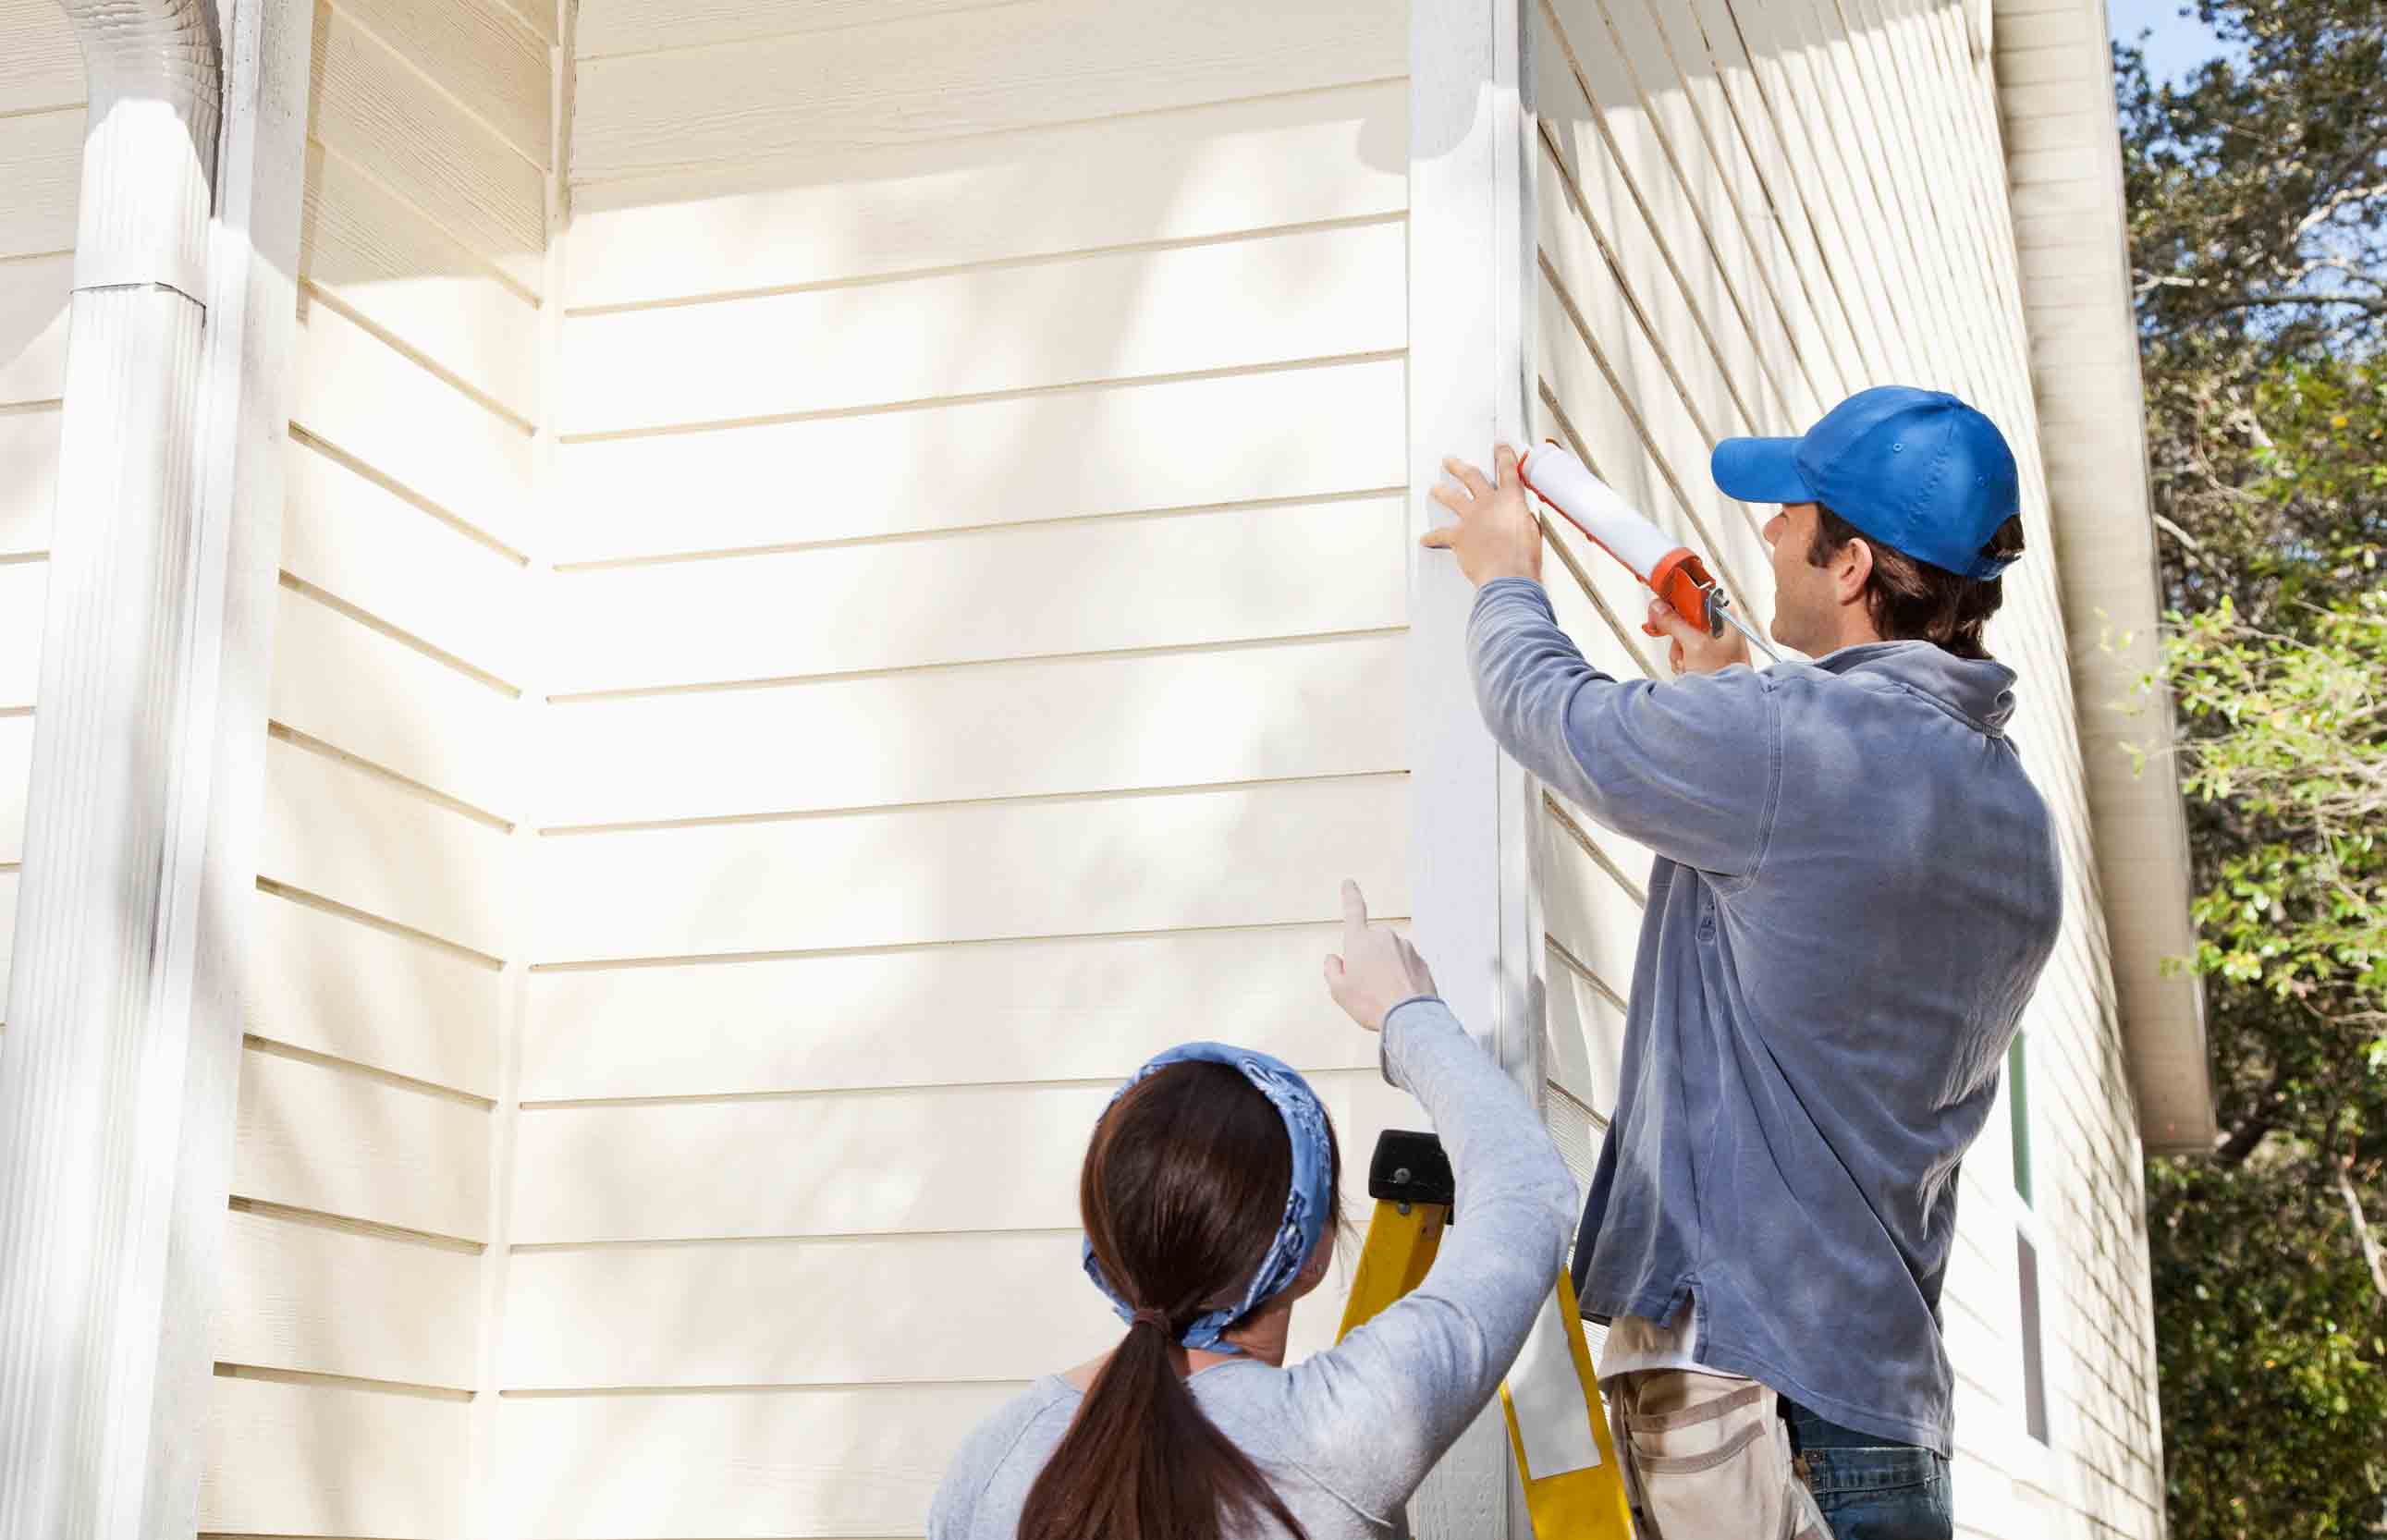 There are a few money-saving home improvements you might want to put on your spring to-do list.